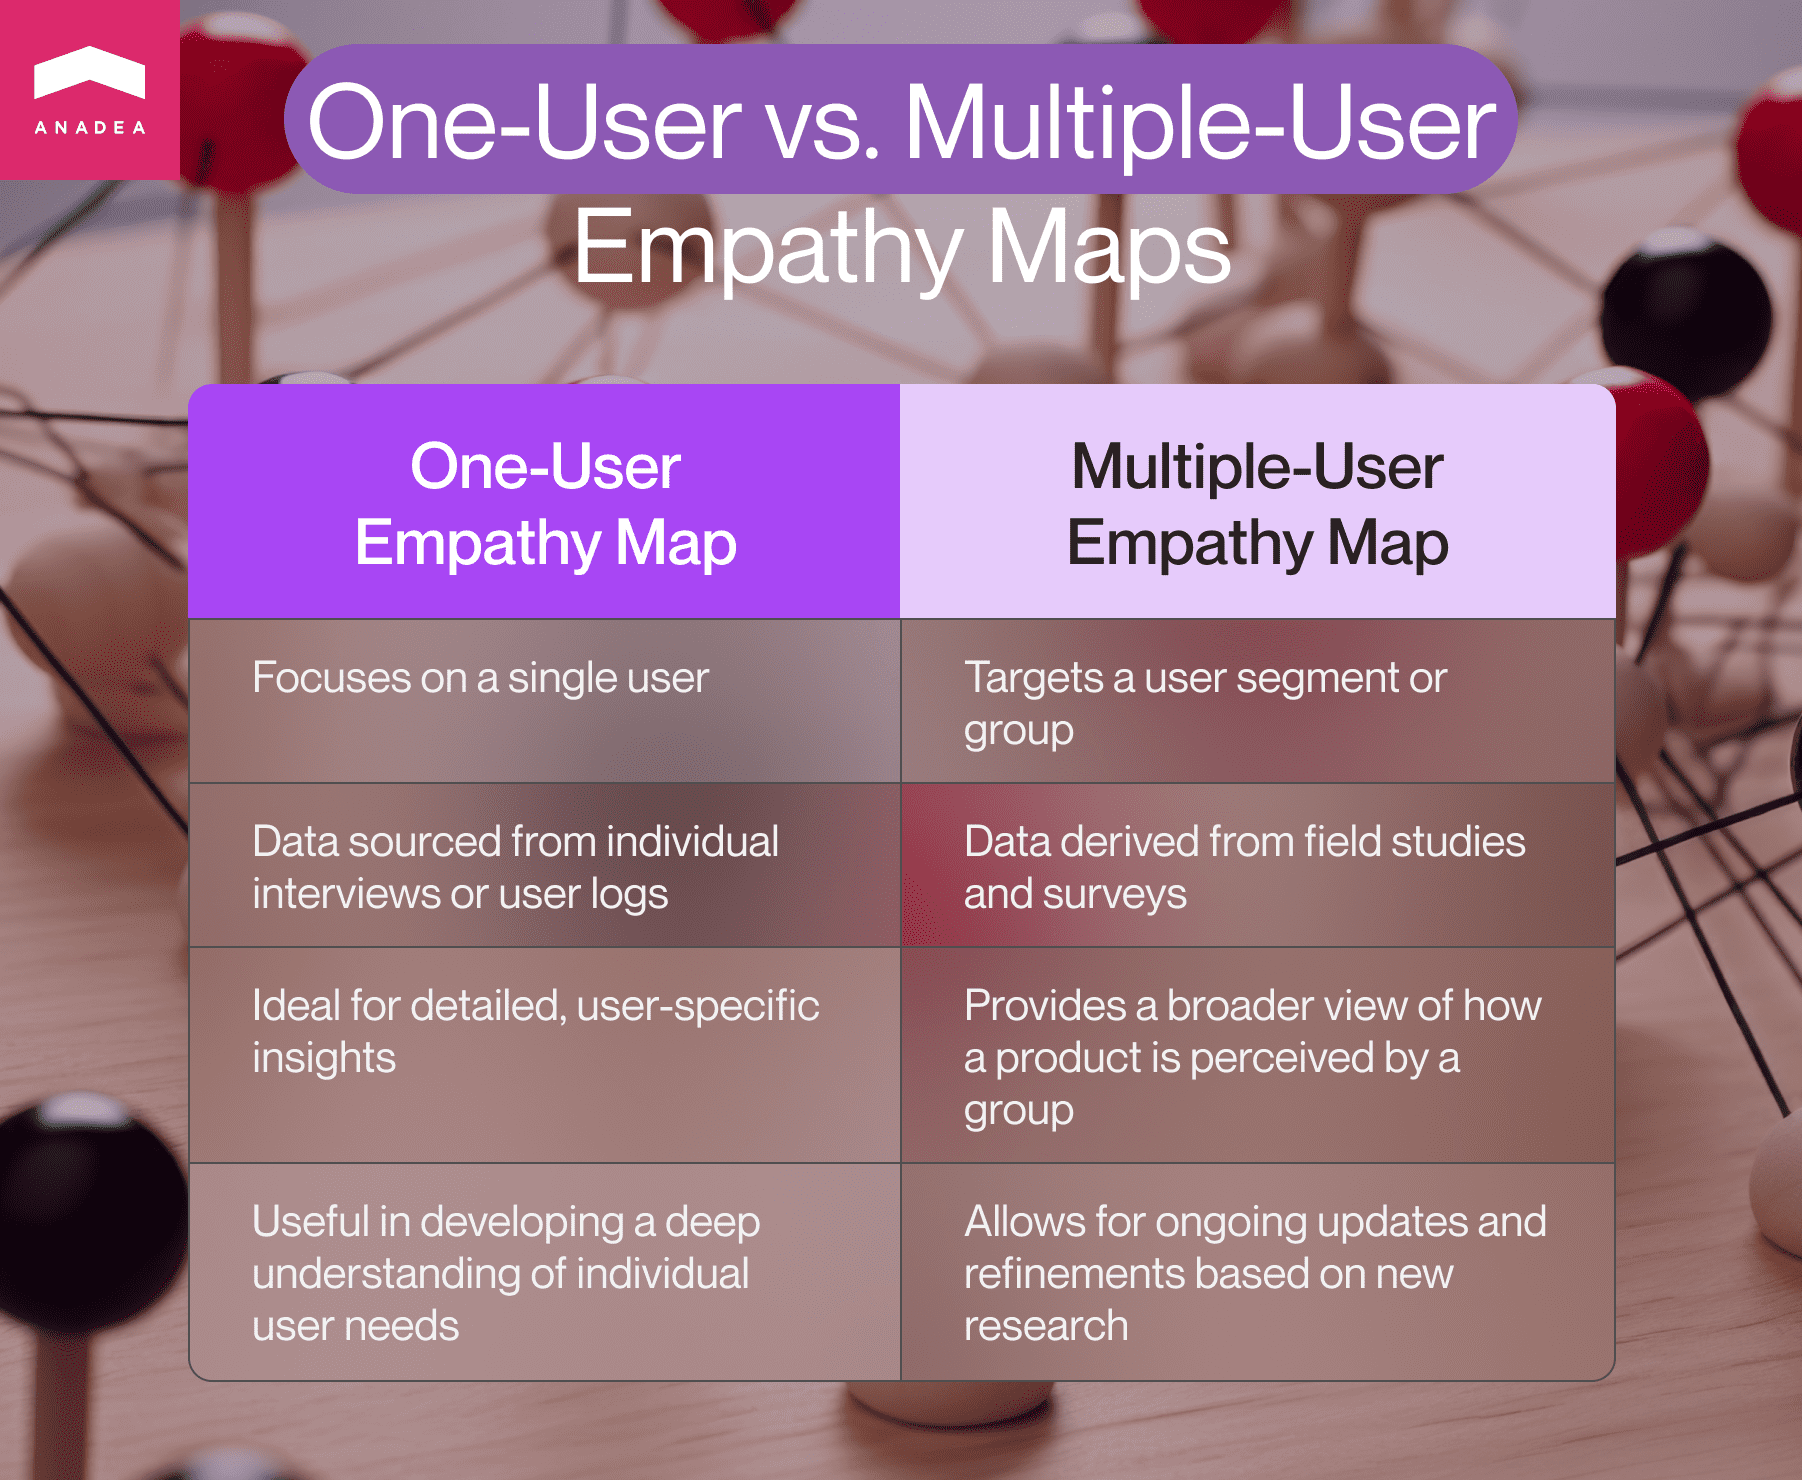 One user and multiple user empathy map difference